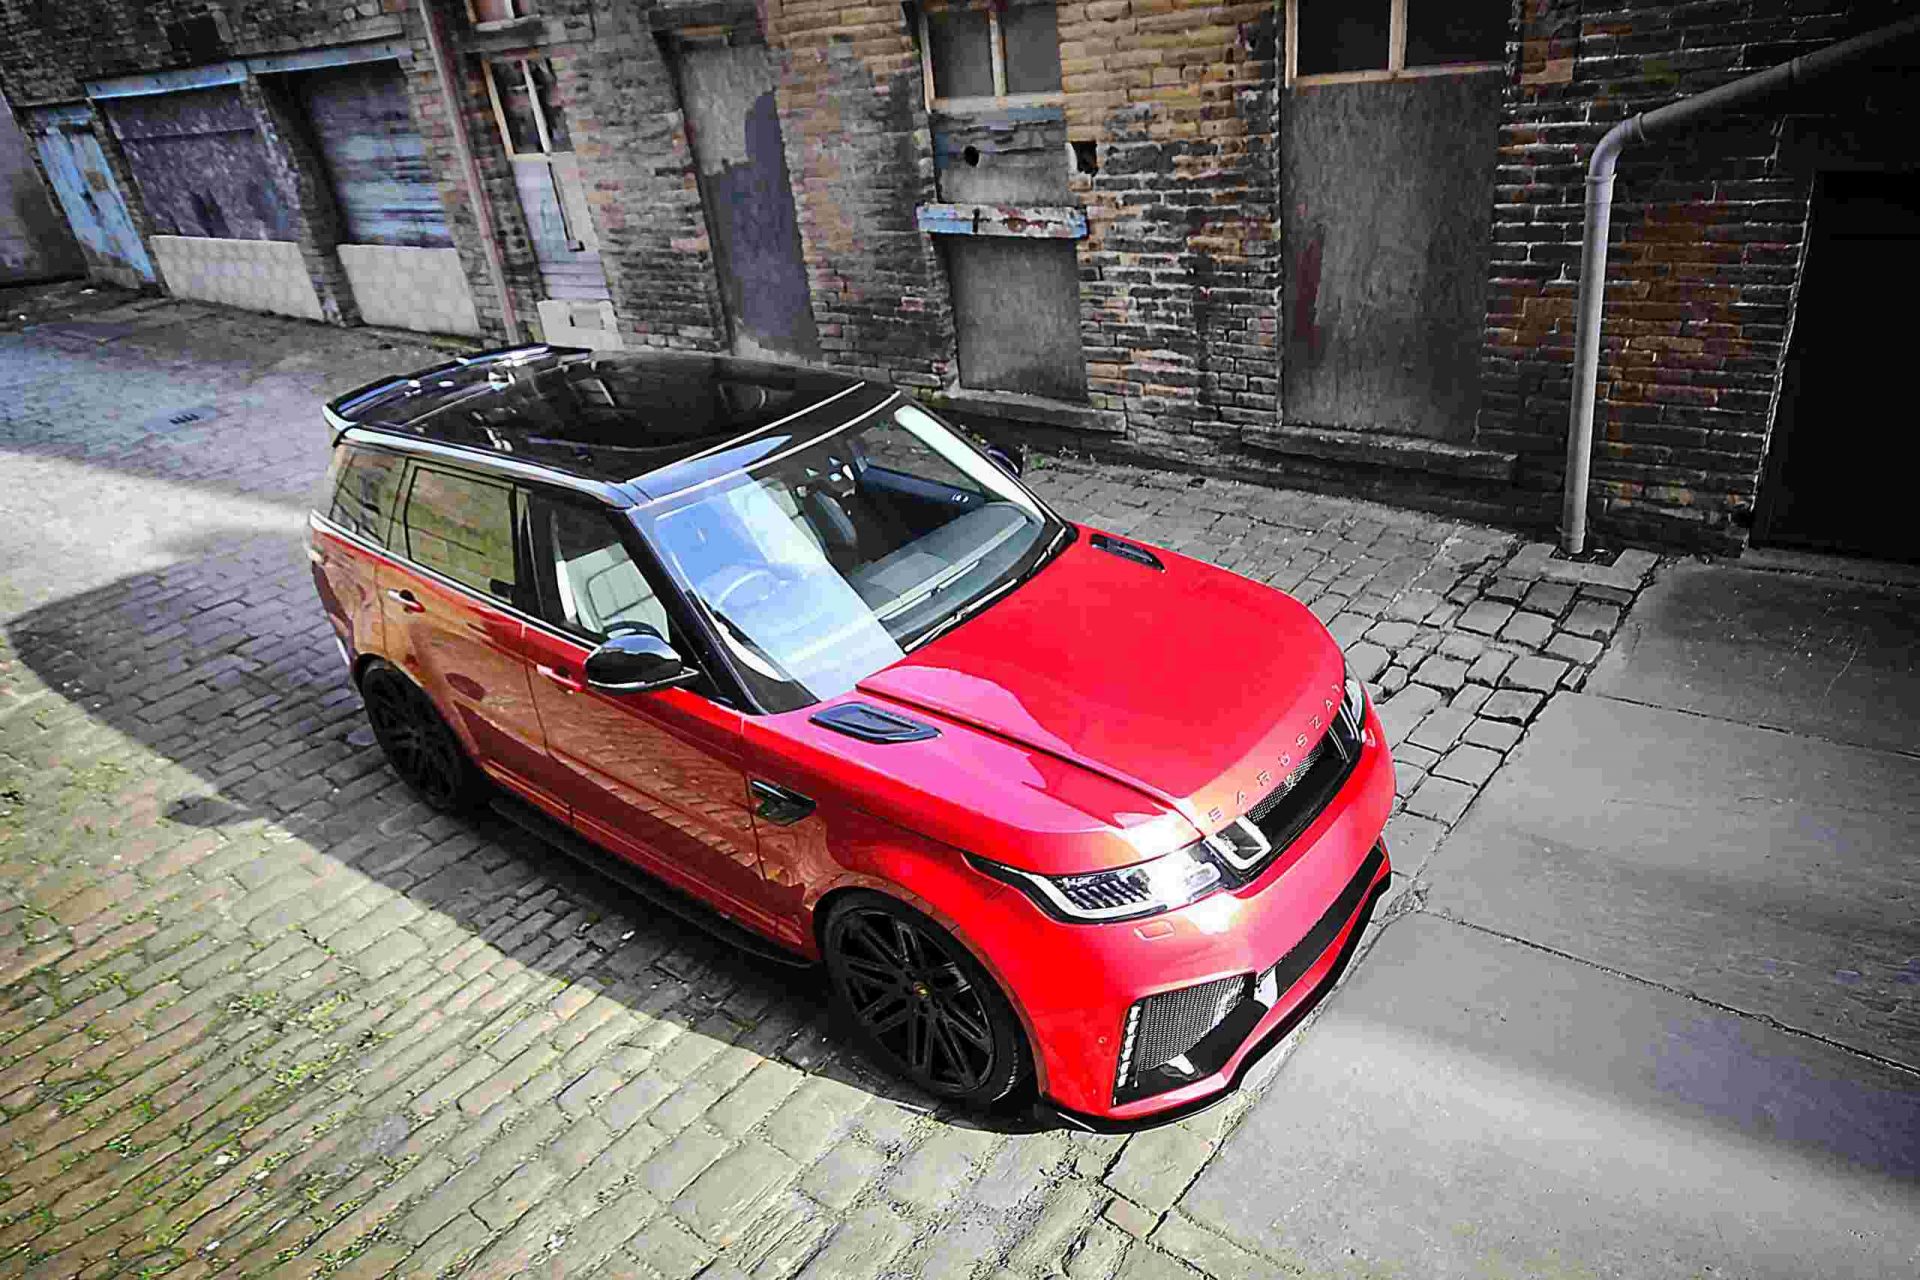 Check our price and buy Barugzai Cabaro body kit for Land Rover Range Rover Sport